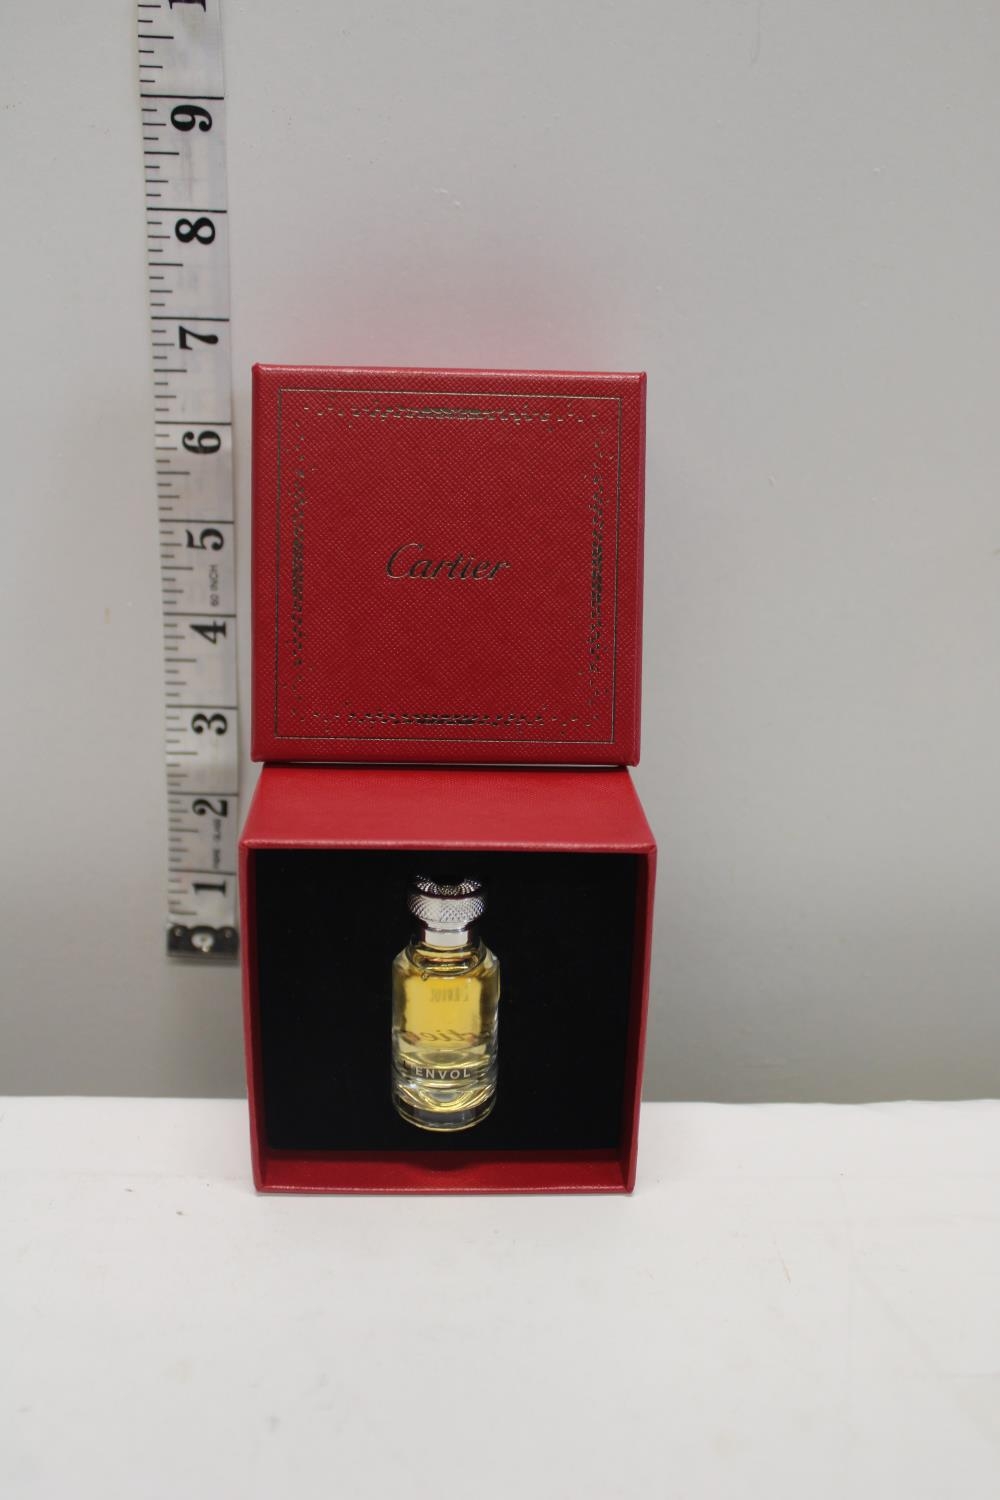 A Cartier L’Envol fragrance in fitted case - 5ml